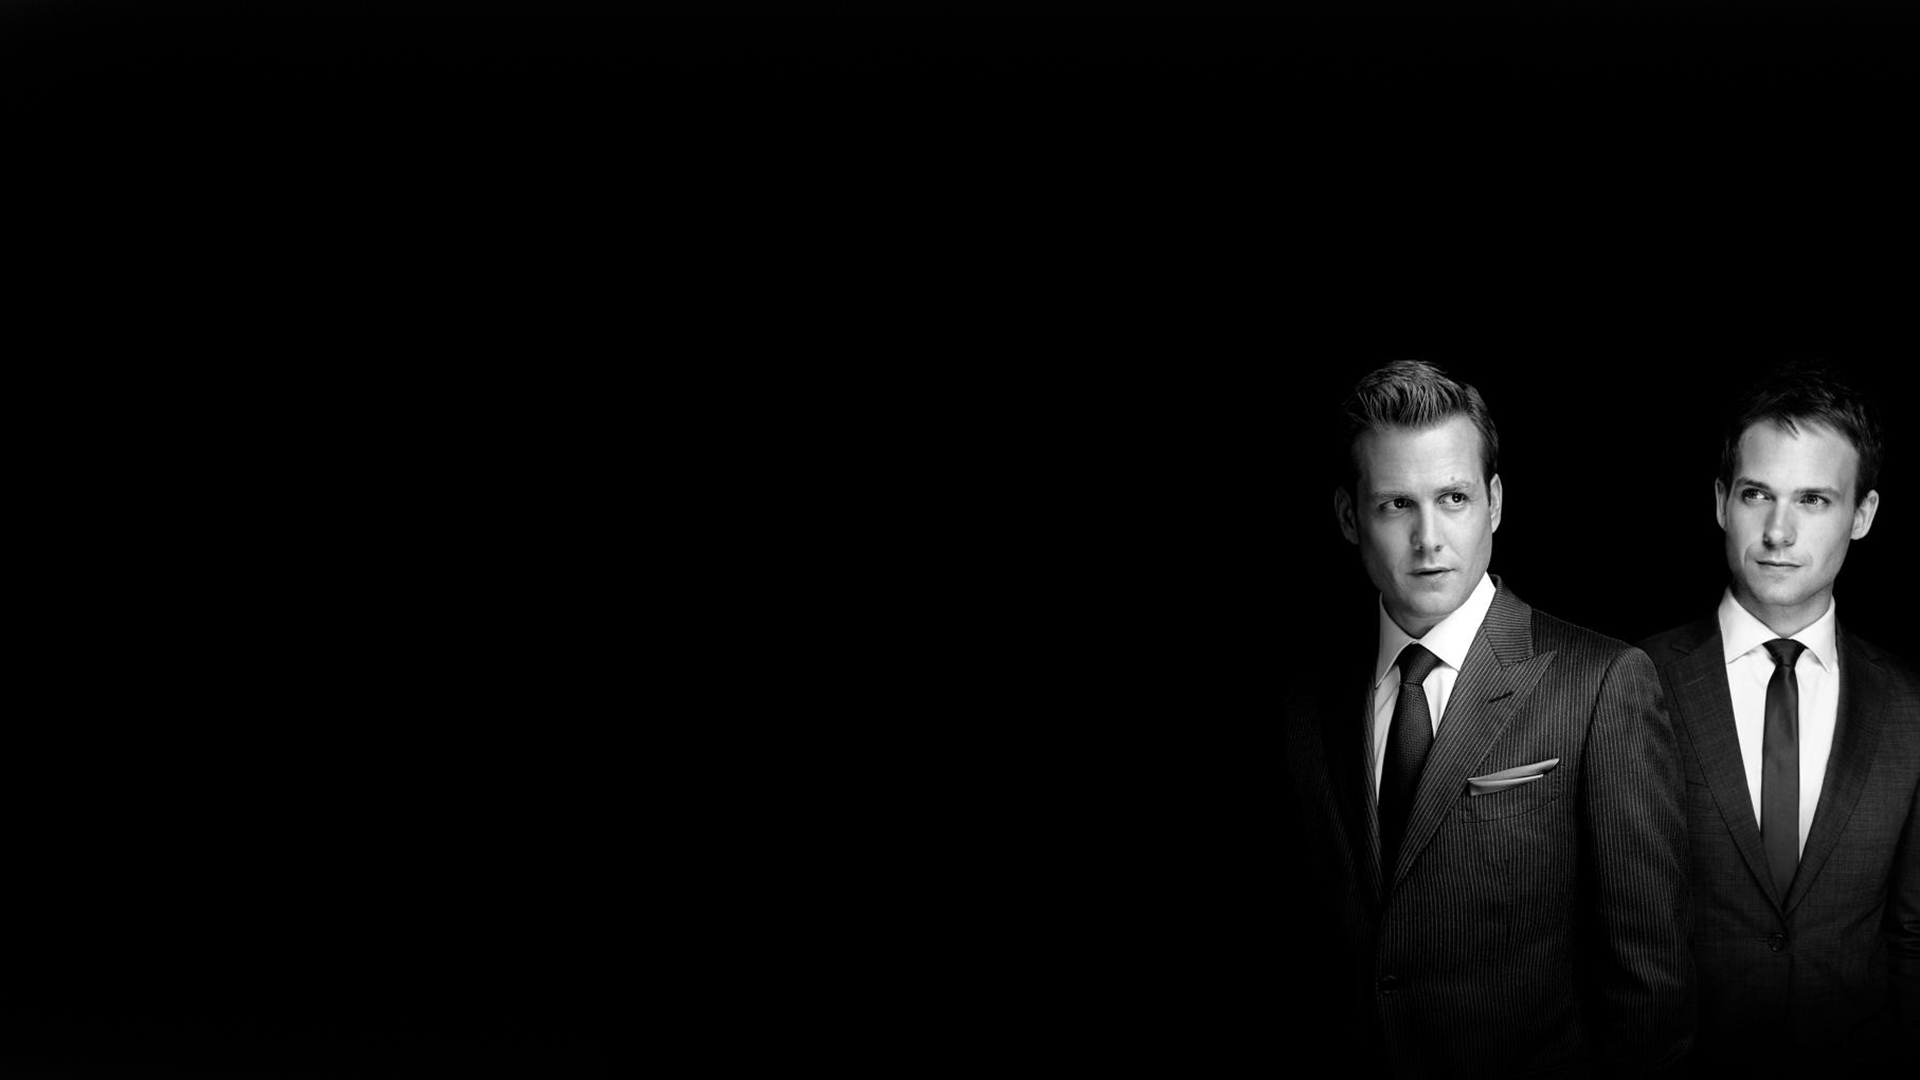 Suits Wallpaper Harvey Specter Saw someone upload their wallpaper 1920x1080